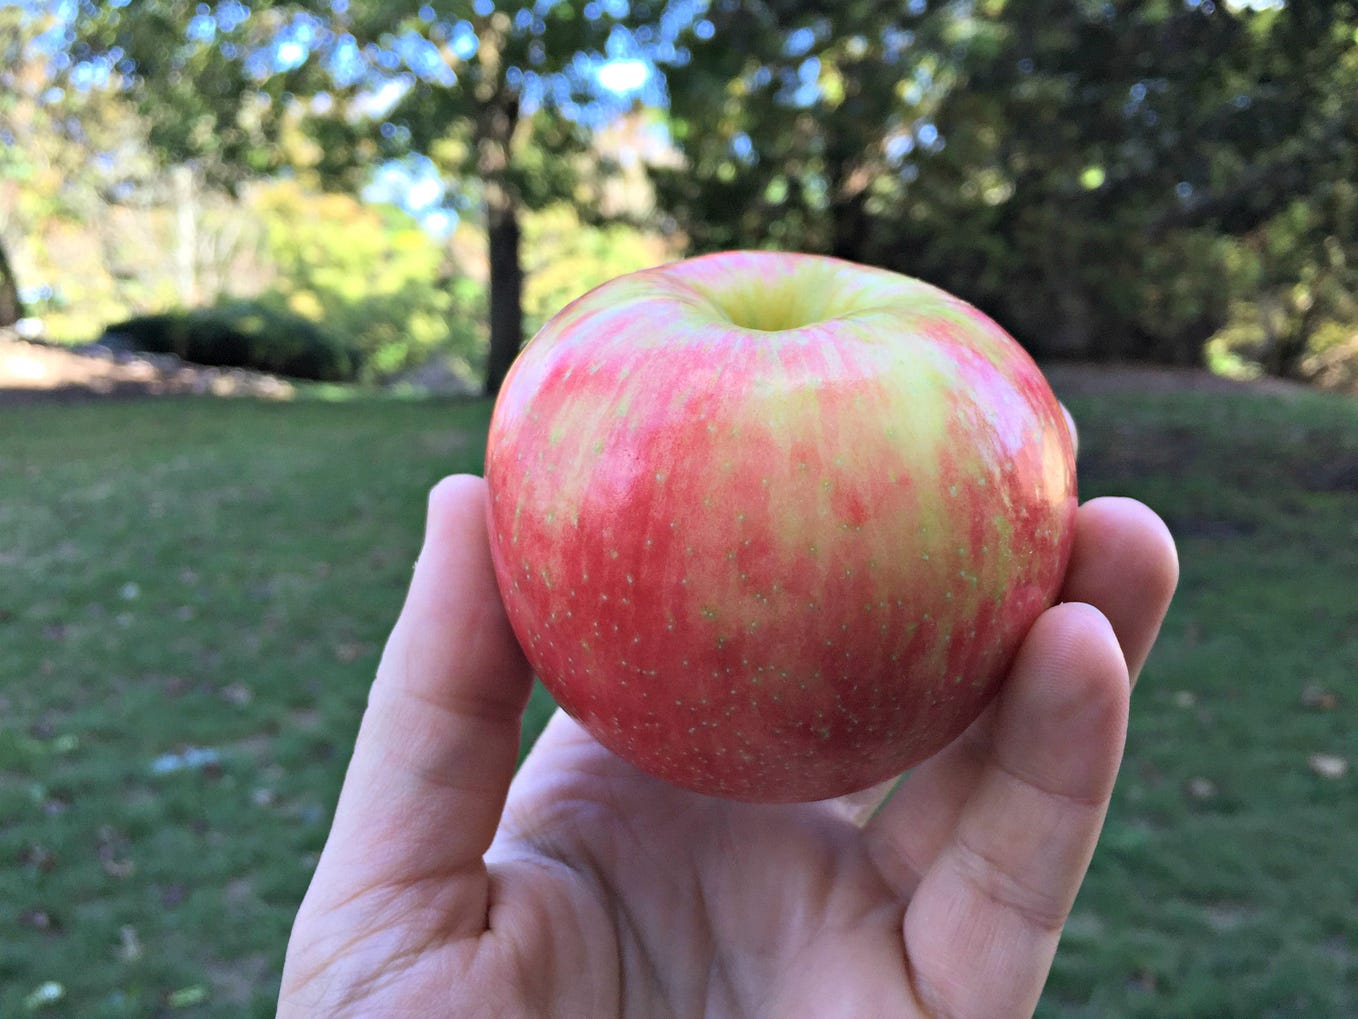 This is the Best-Tasting Apple in the World